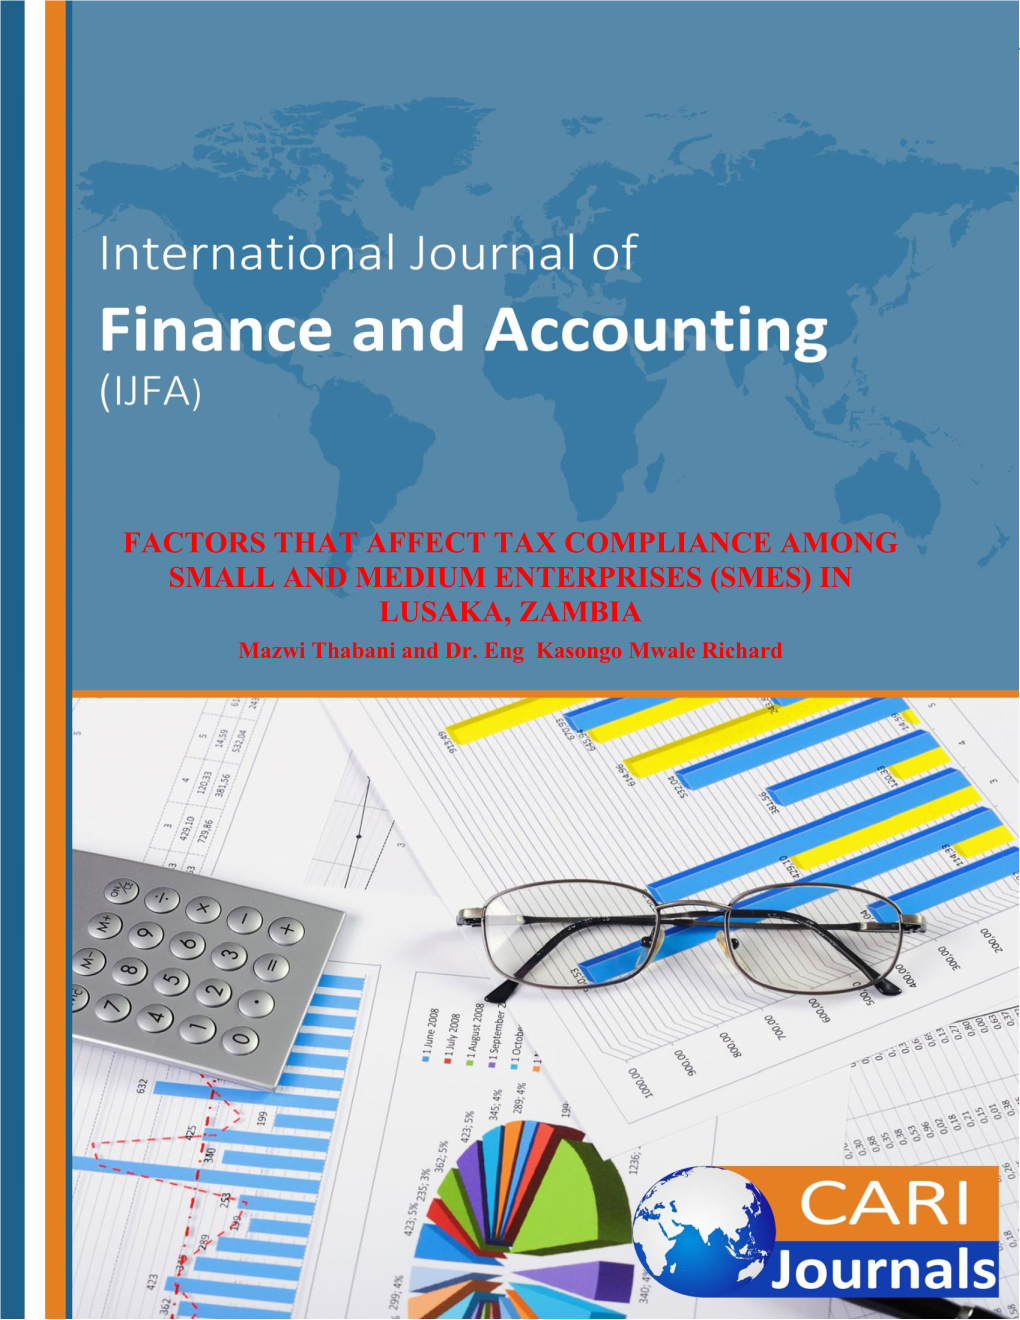 FACTORS THAT AFFECT TAX COMPLIANCE AMONG SMALL and MEDIUM ENTERPRISES (SMES) in LUSAKA, ZAMBIA Mazwi Thabani and Dr